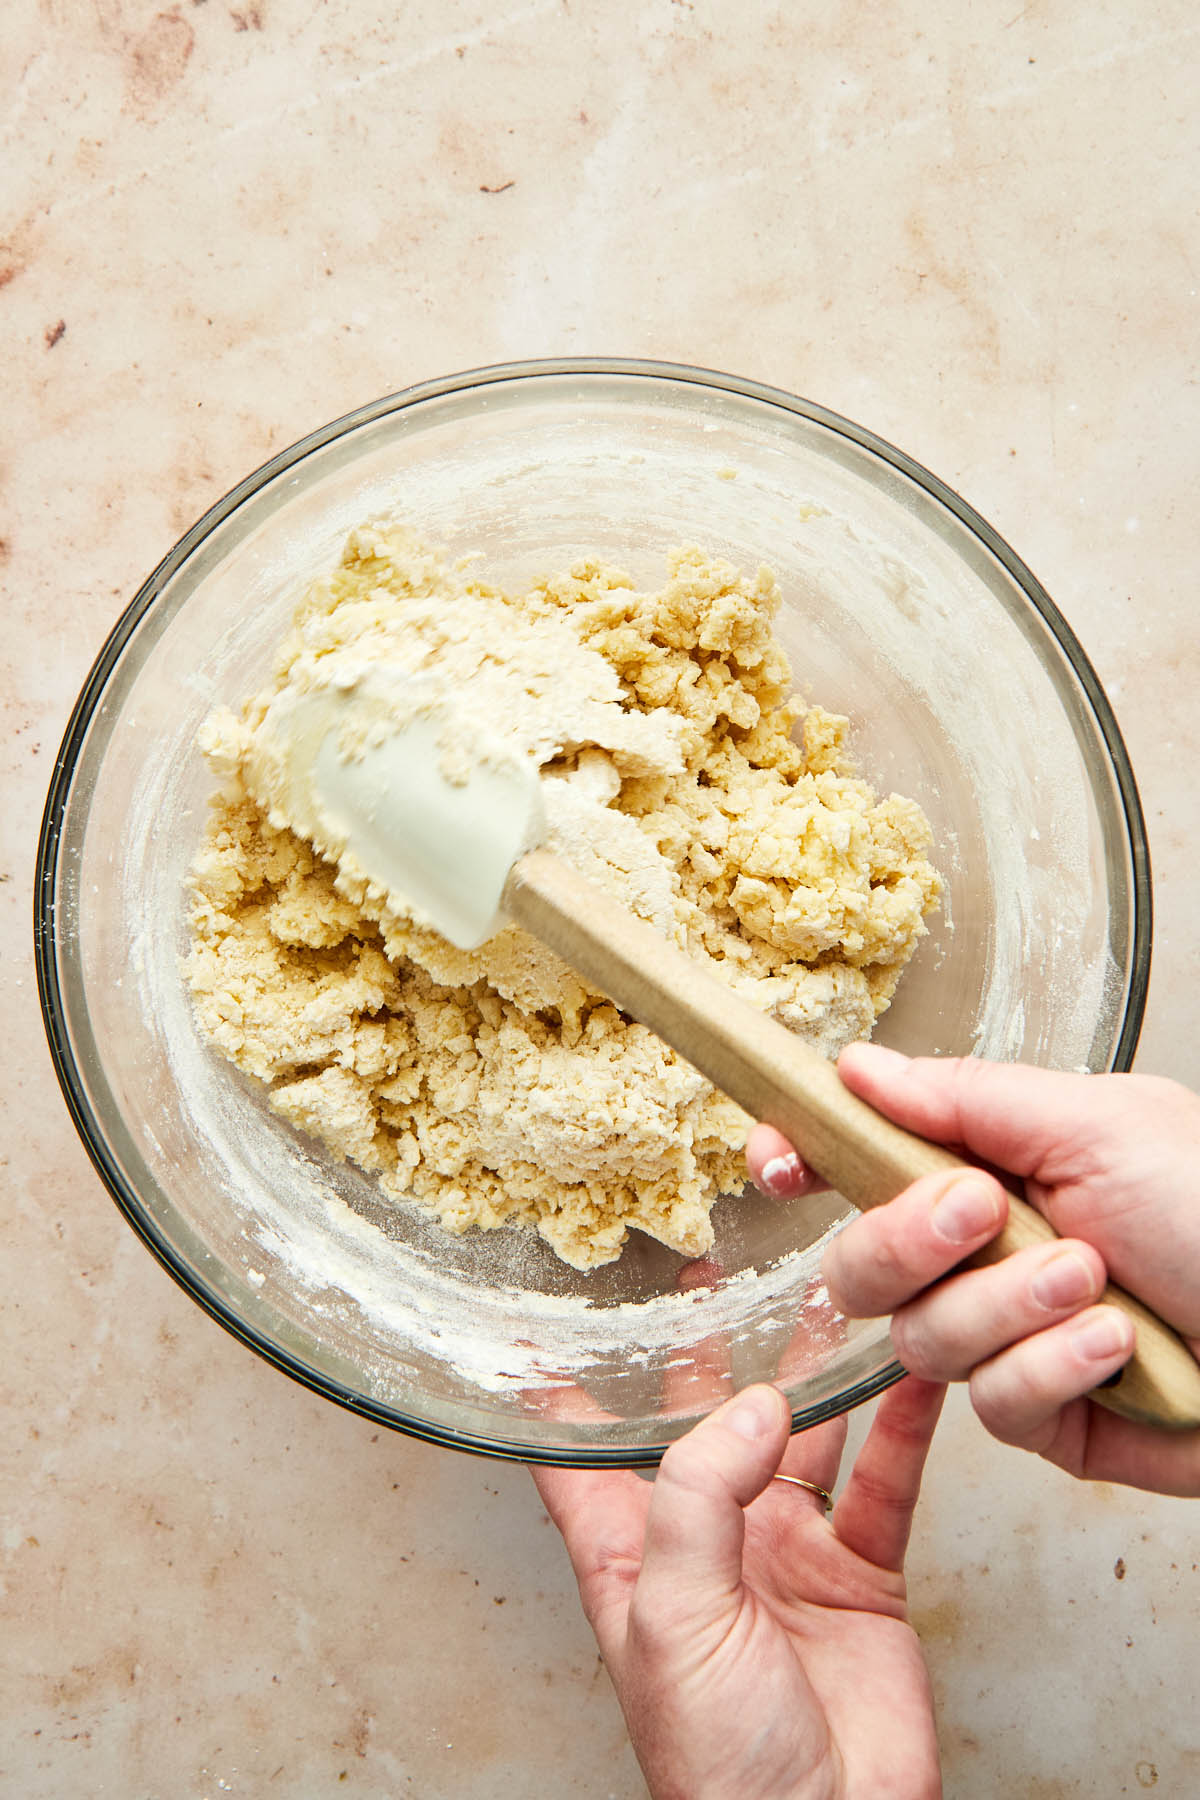 A hand using a rubber spatula to mix any remaingin dry flour bits into a bowl of cookie dough.